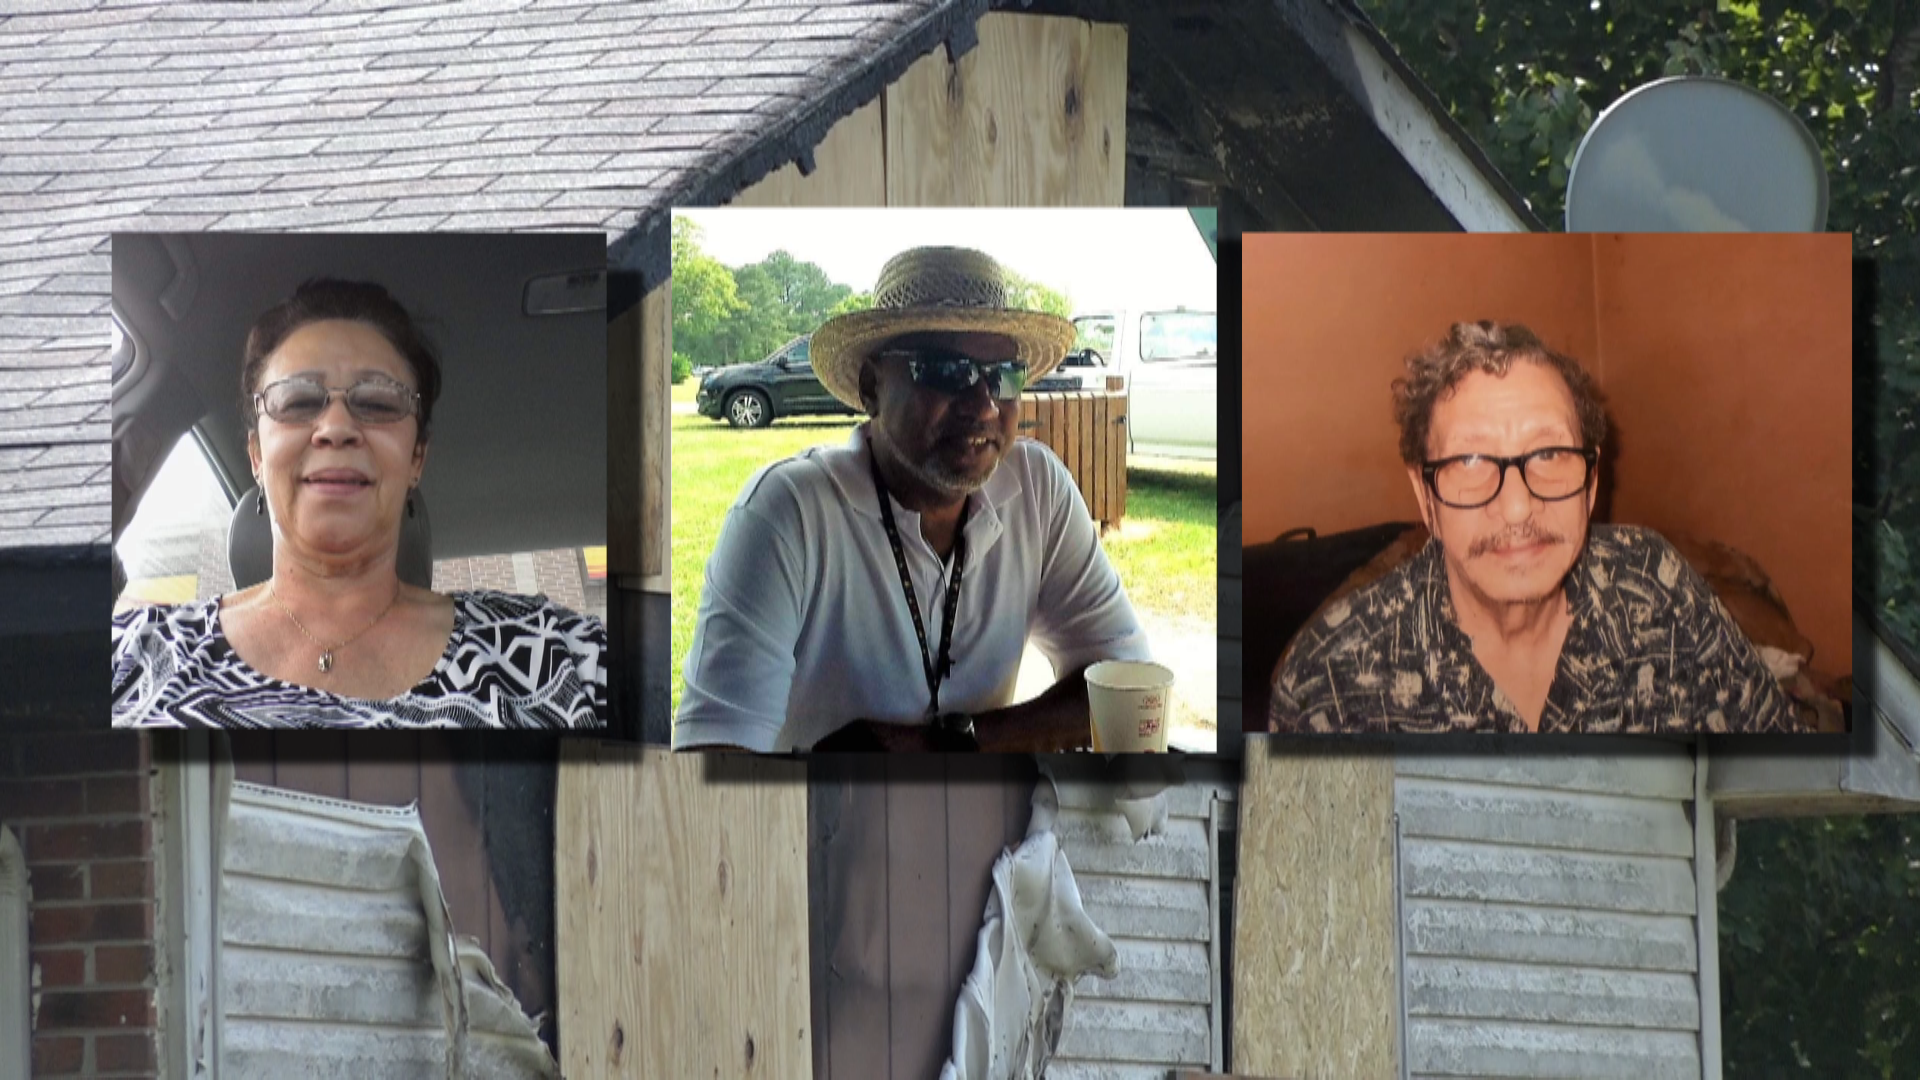 Family members told WFMY News 2 that the three victims - Burlie Graves, Yvonne Haas, and Alvis Brown - had a loving extended family.